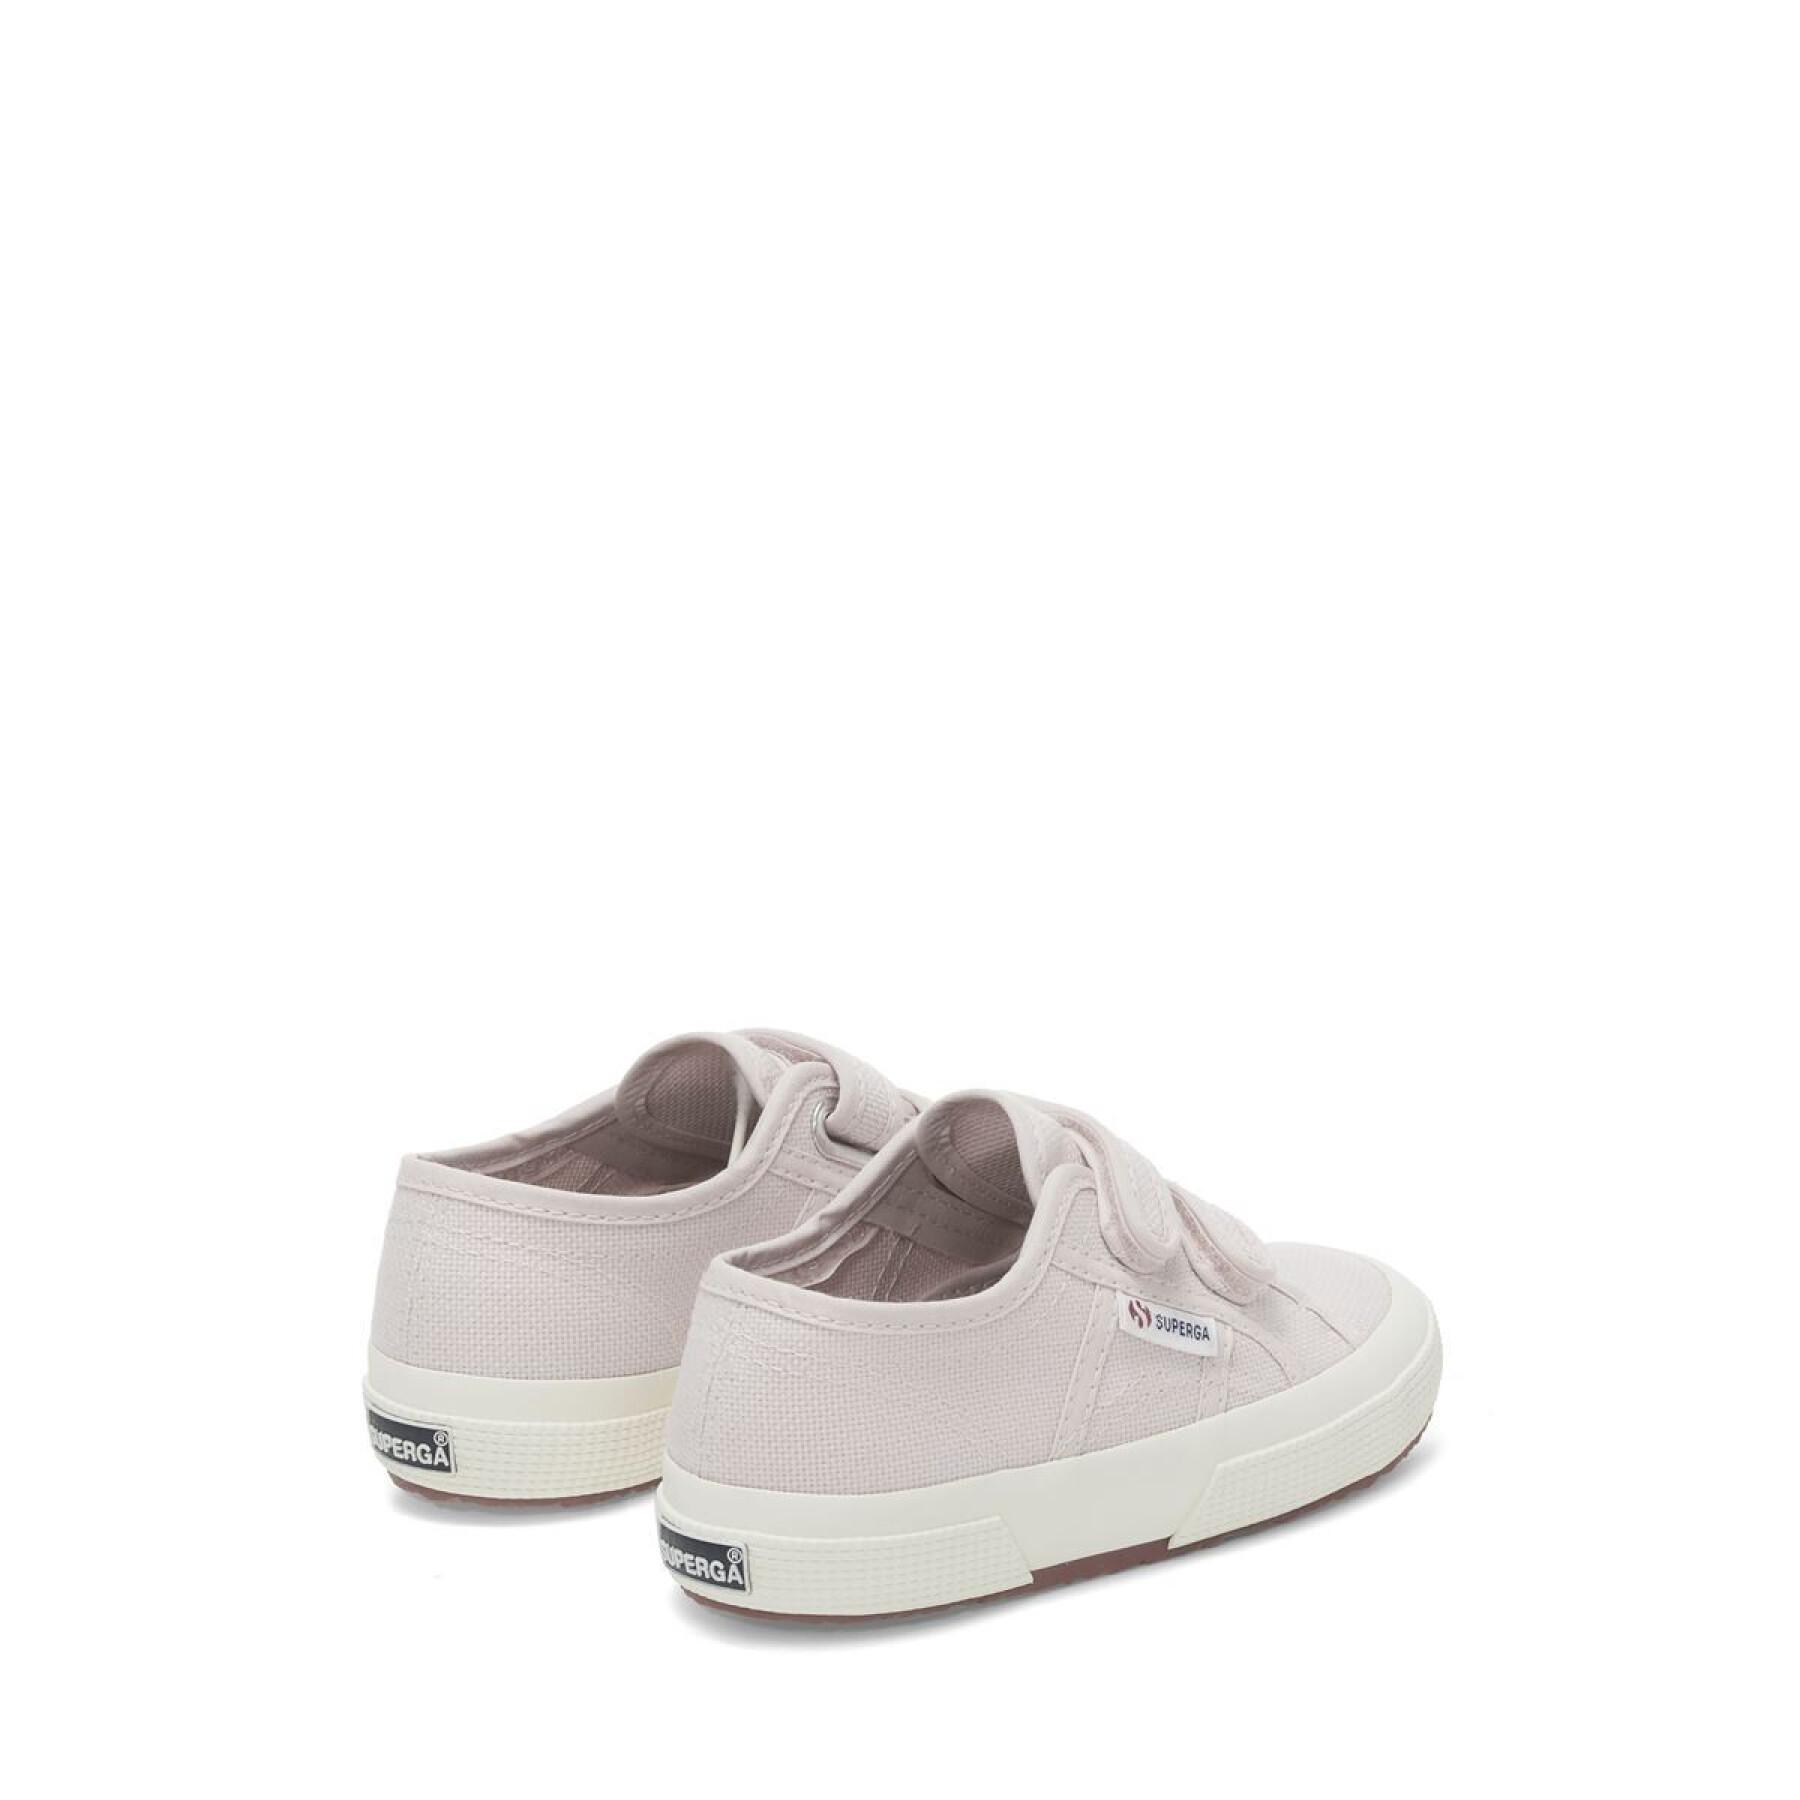 Baby sneakers Superga 2750-Cotjstrap Classic